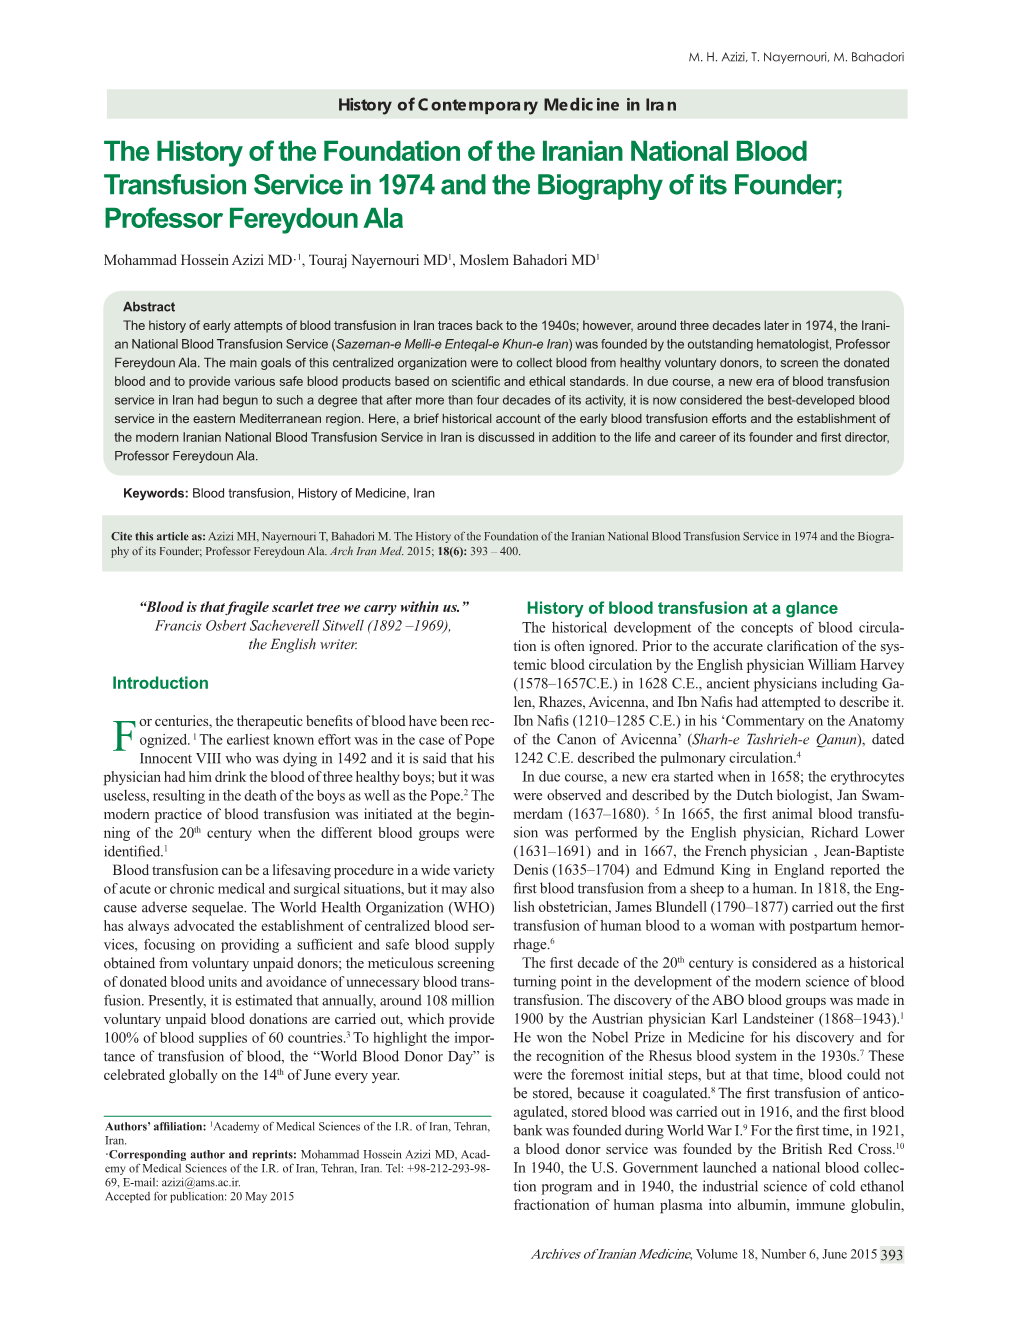 The History of the Foundation of the Iranian National Blood Transfusion Service in 1974 and the Biography of Its Founder; Professor Fereydoun Ala